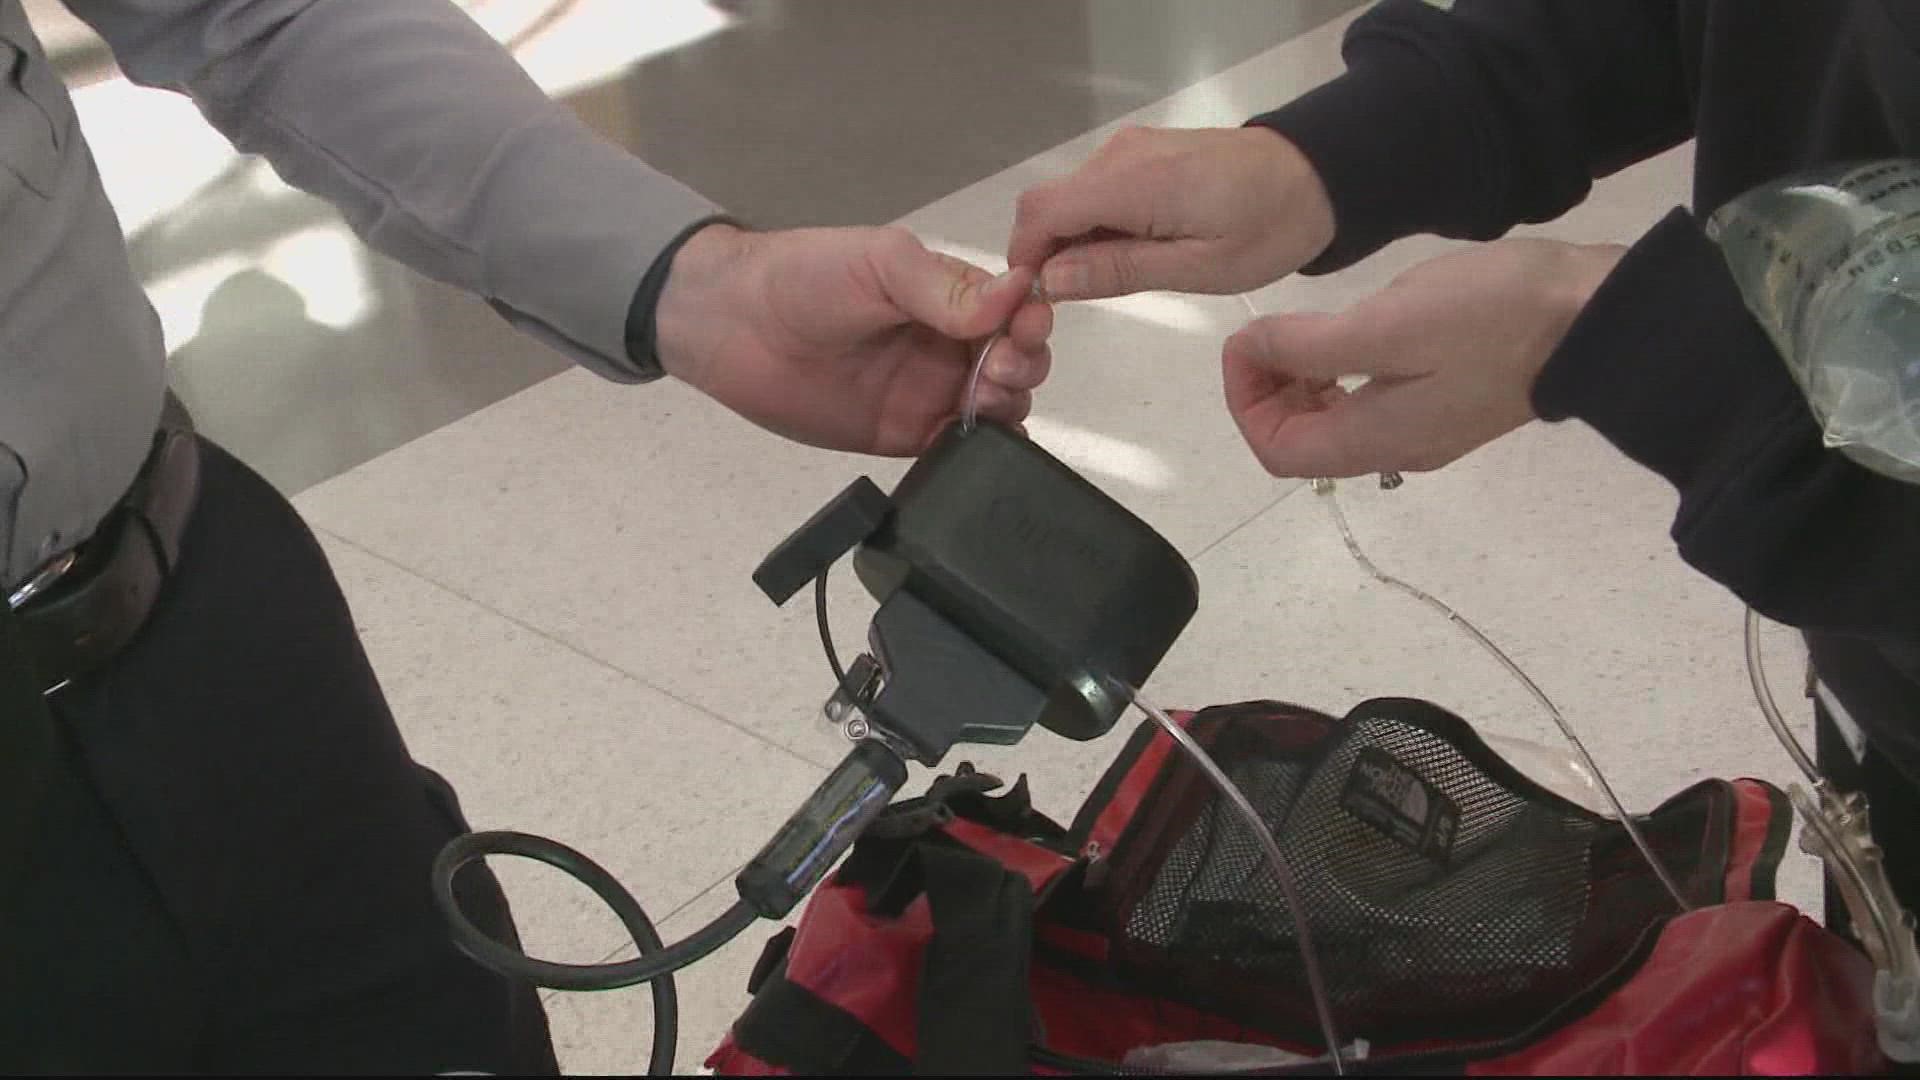 New technology allows Fairfax County Police to do blood transfusions away from a hospital, which could save lives.